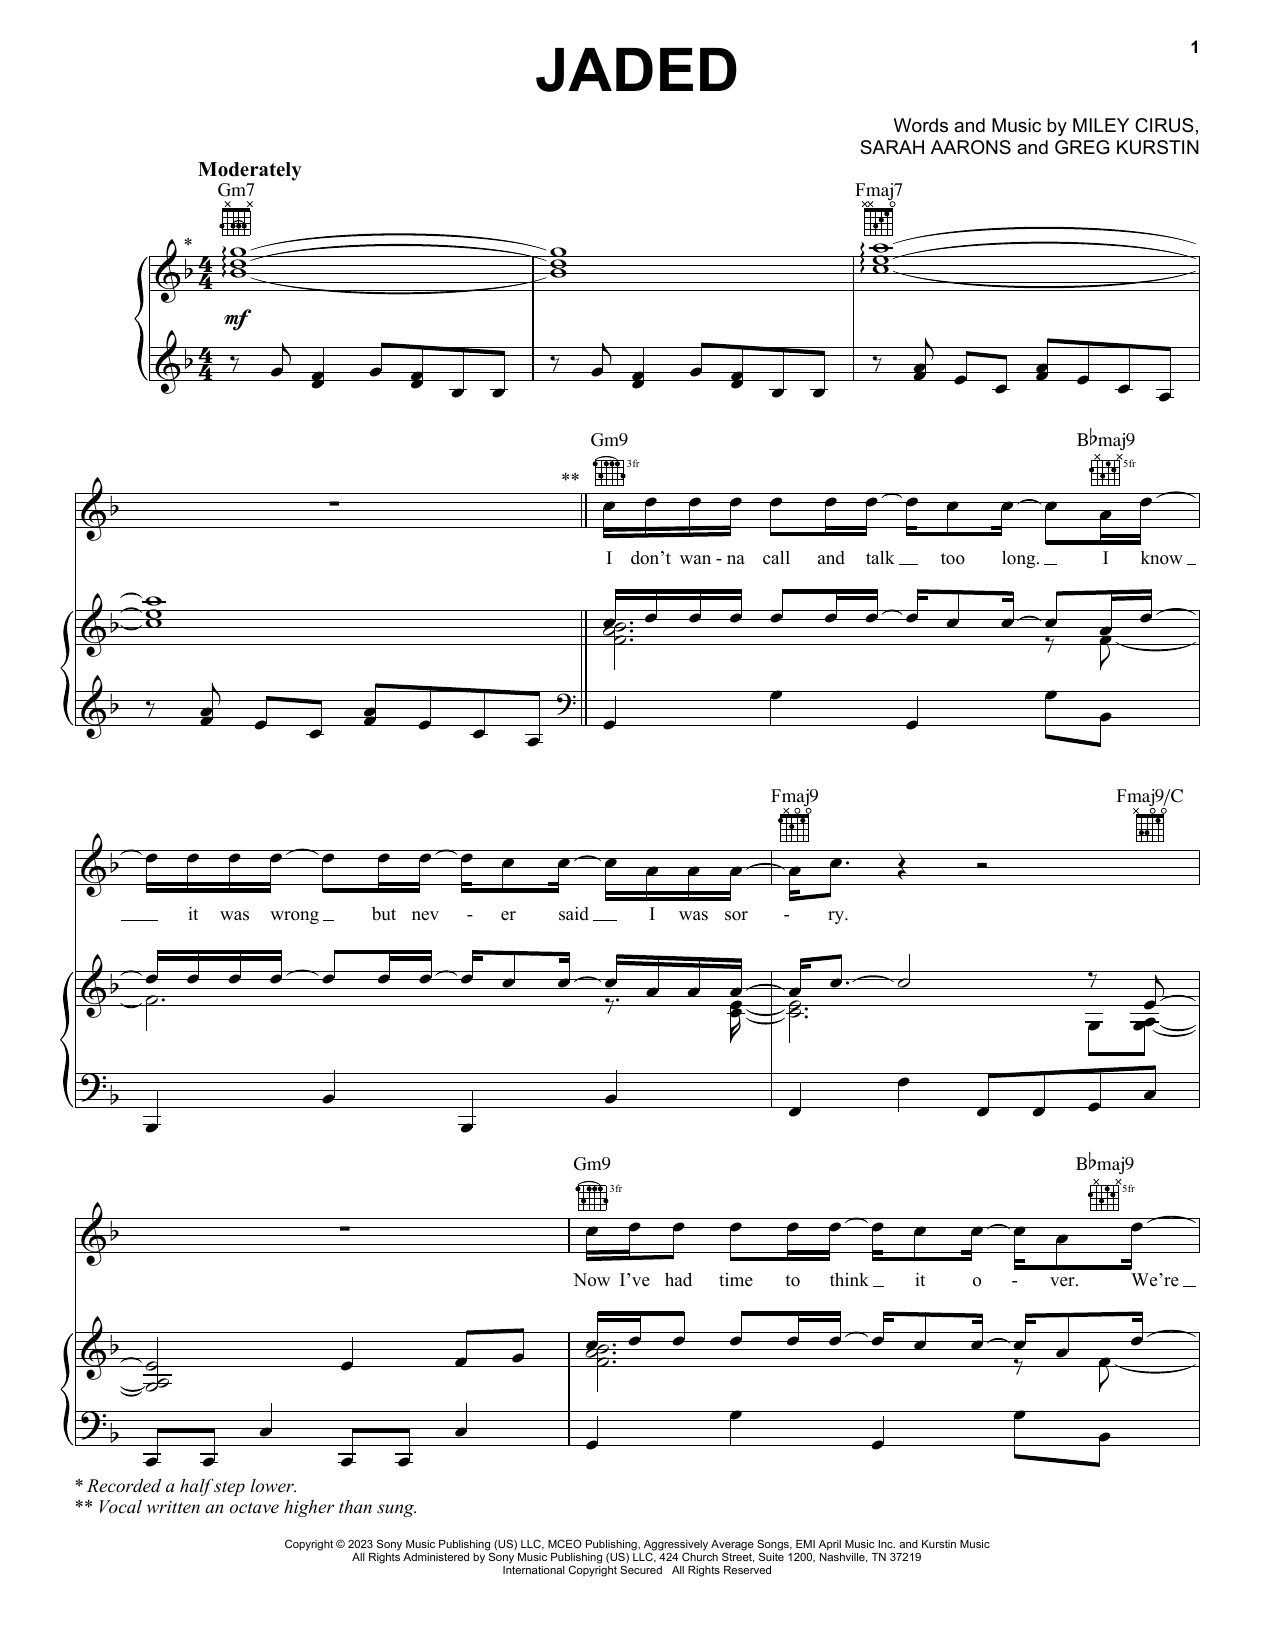 Miley Cyrus Jaded sheet music notes and chords. Download Printable PDF.